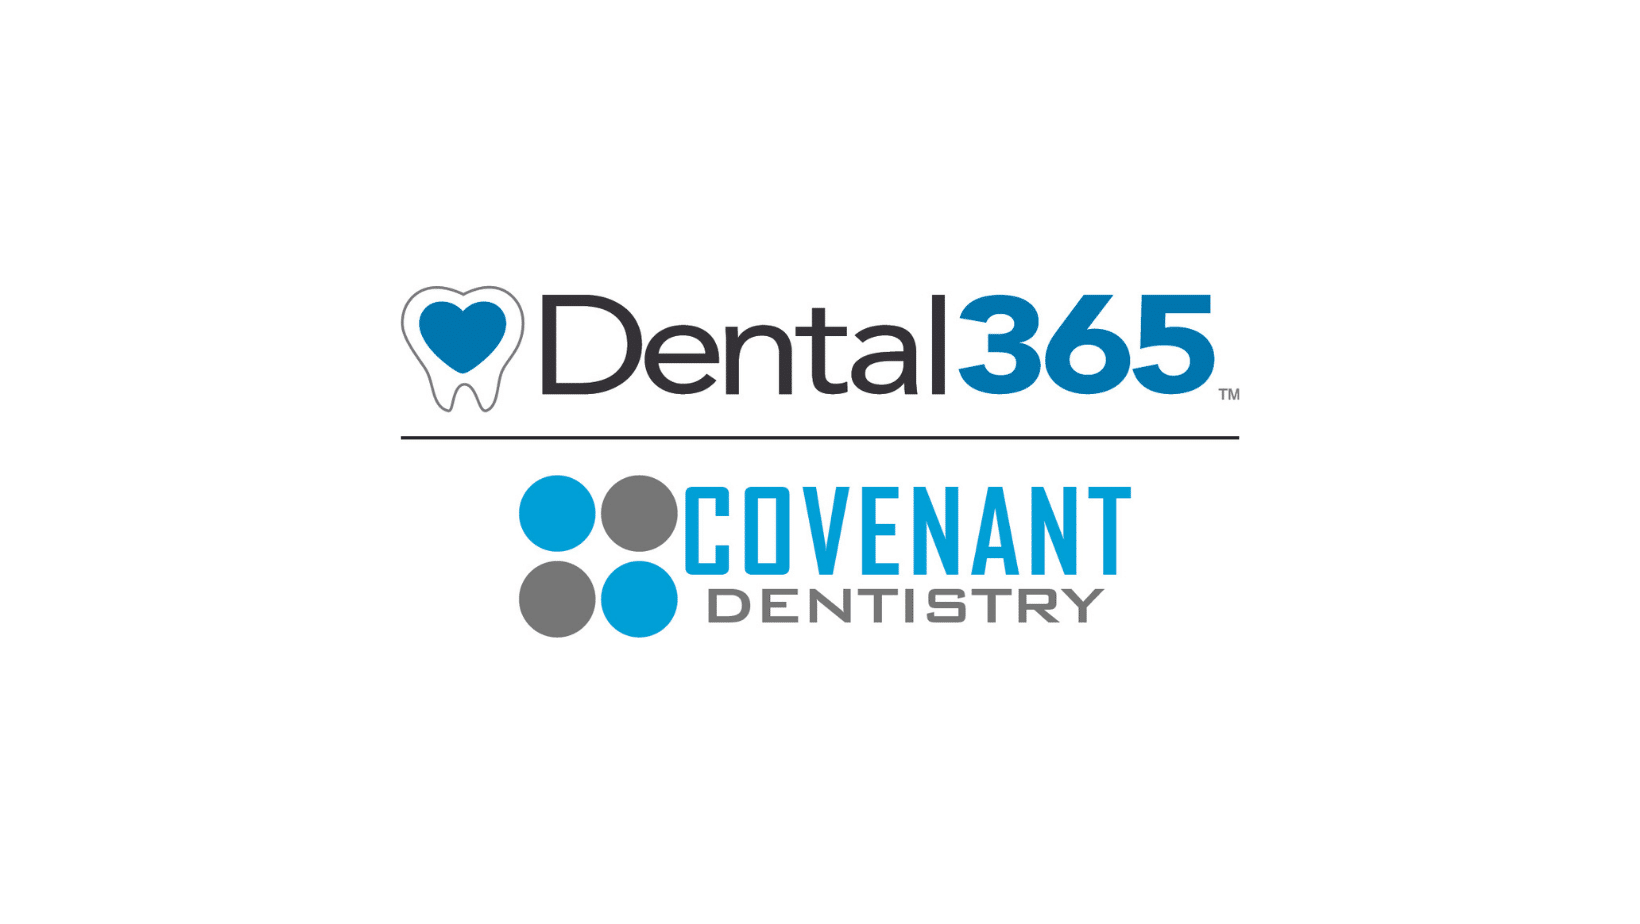 Dental365 Opens First Location in the Bronx